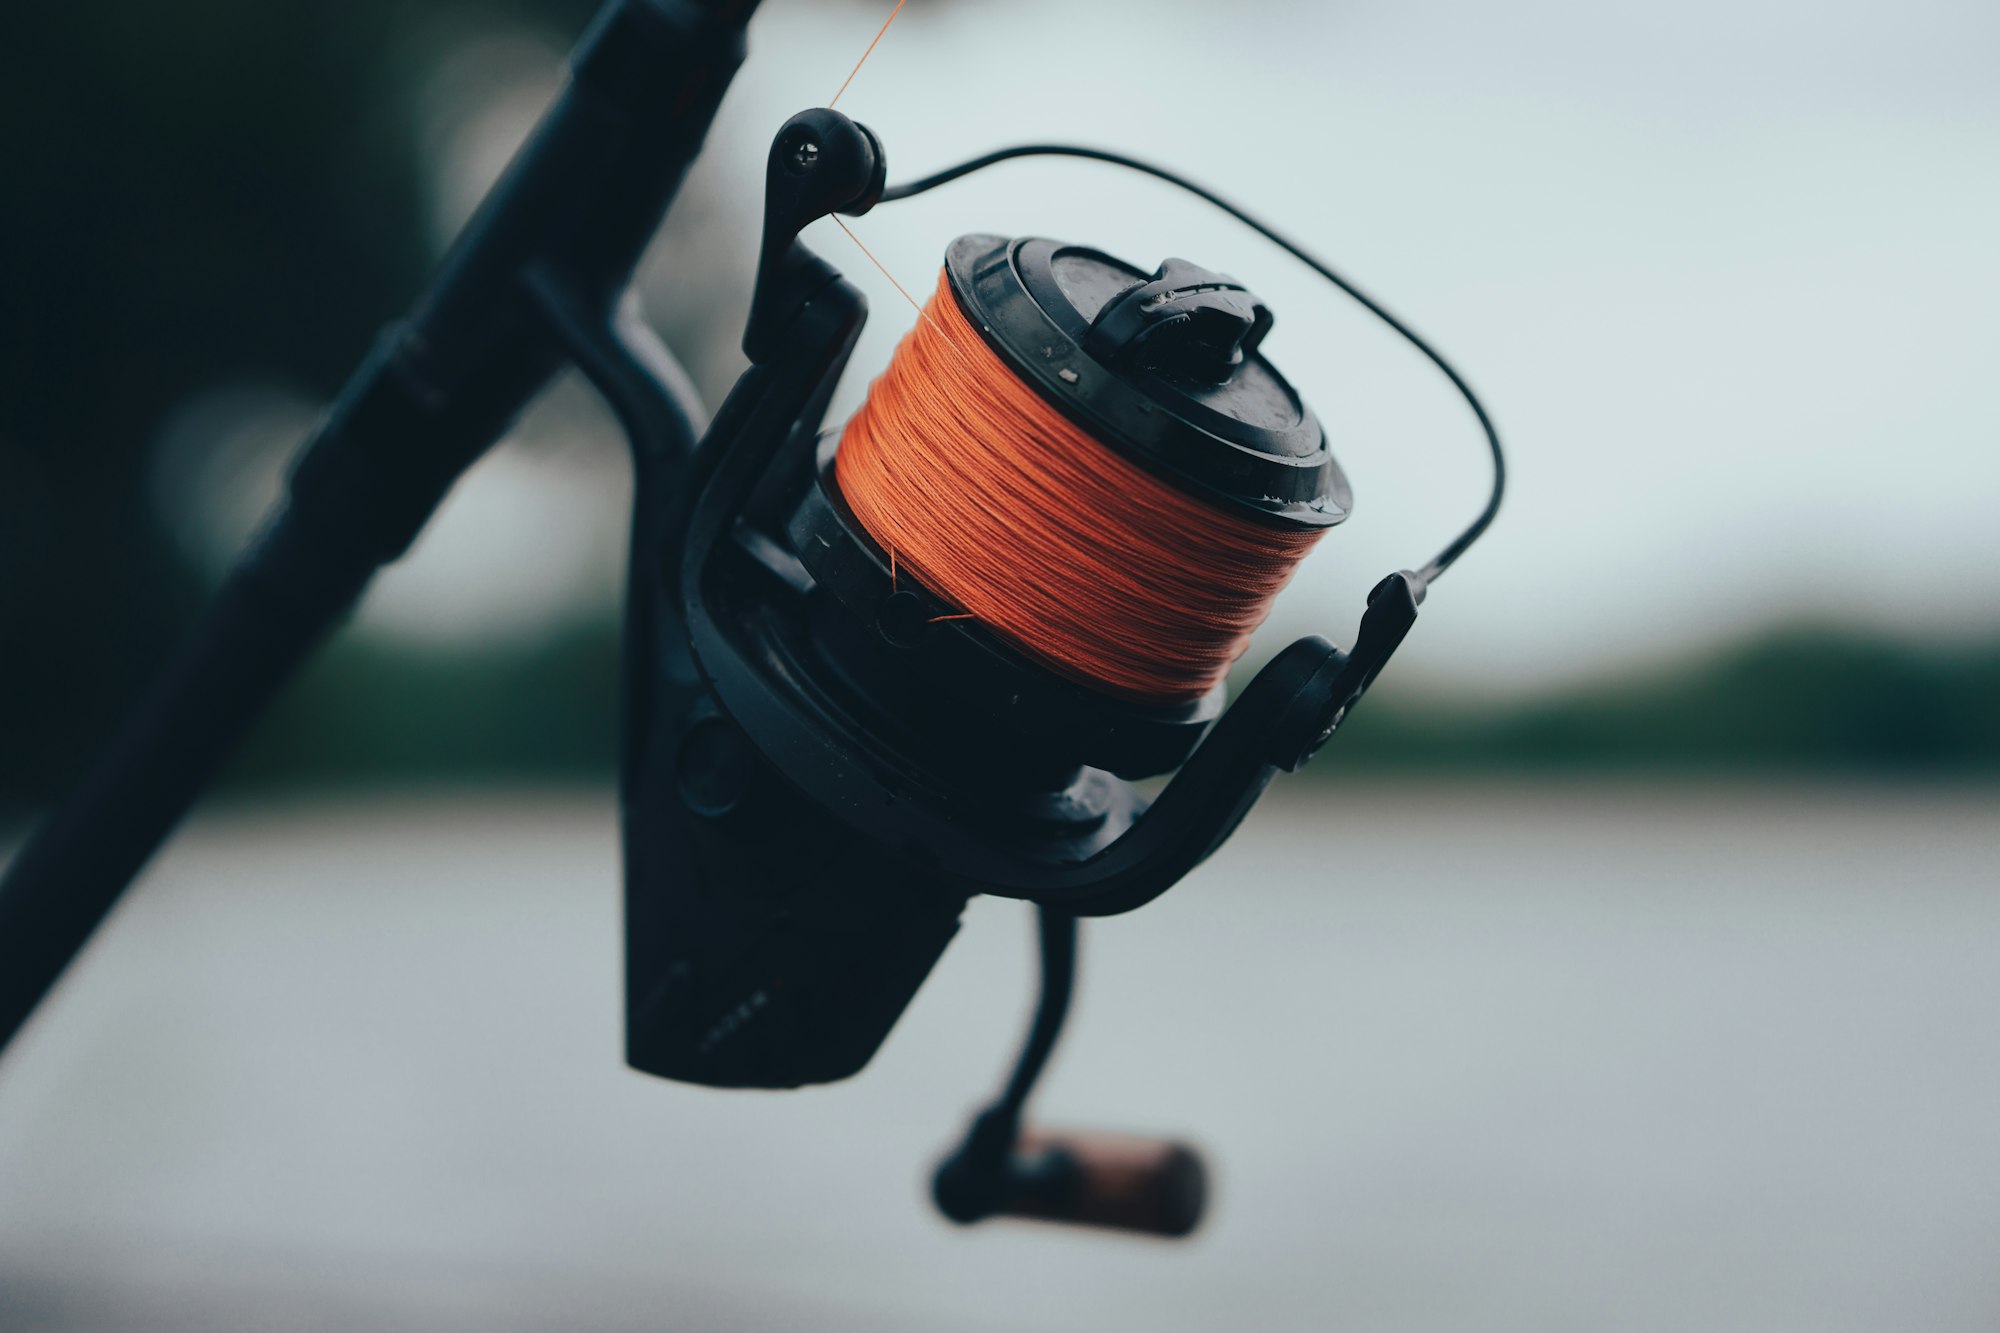 Why choose a spinning reel for bass fishing? When to choose pinning reels over a baitcasting reel